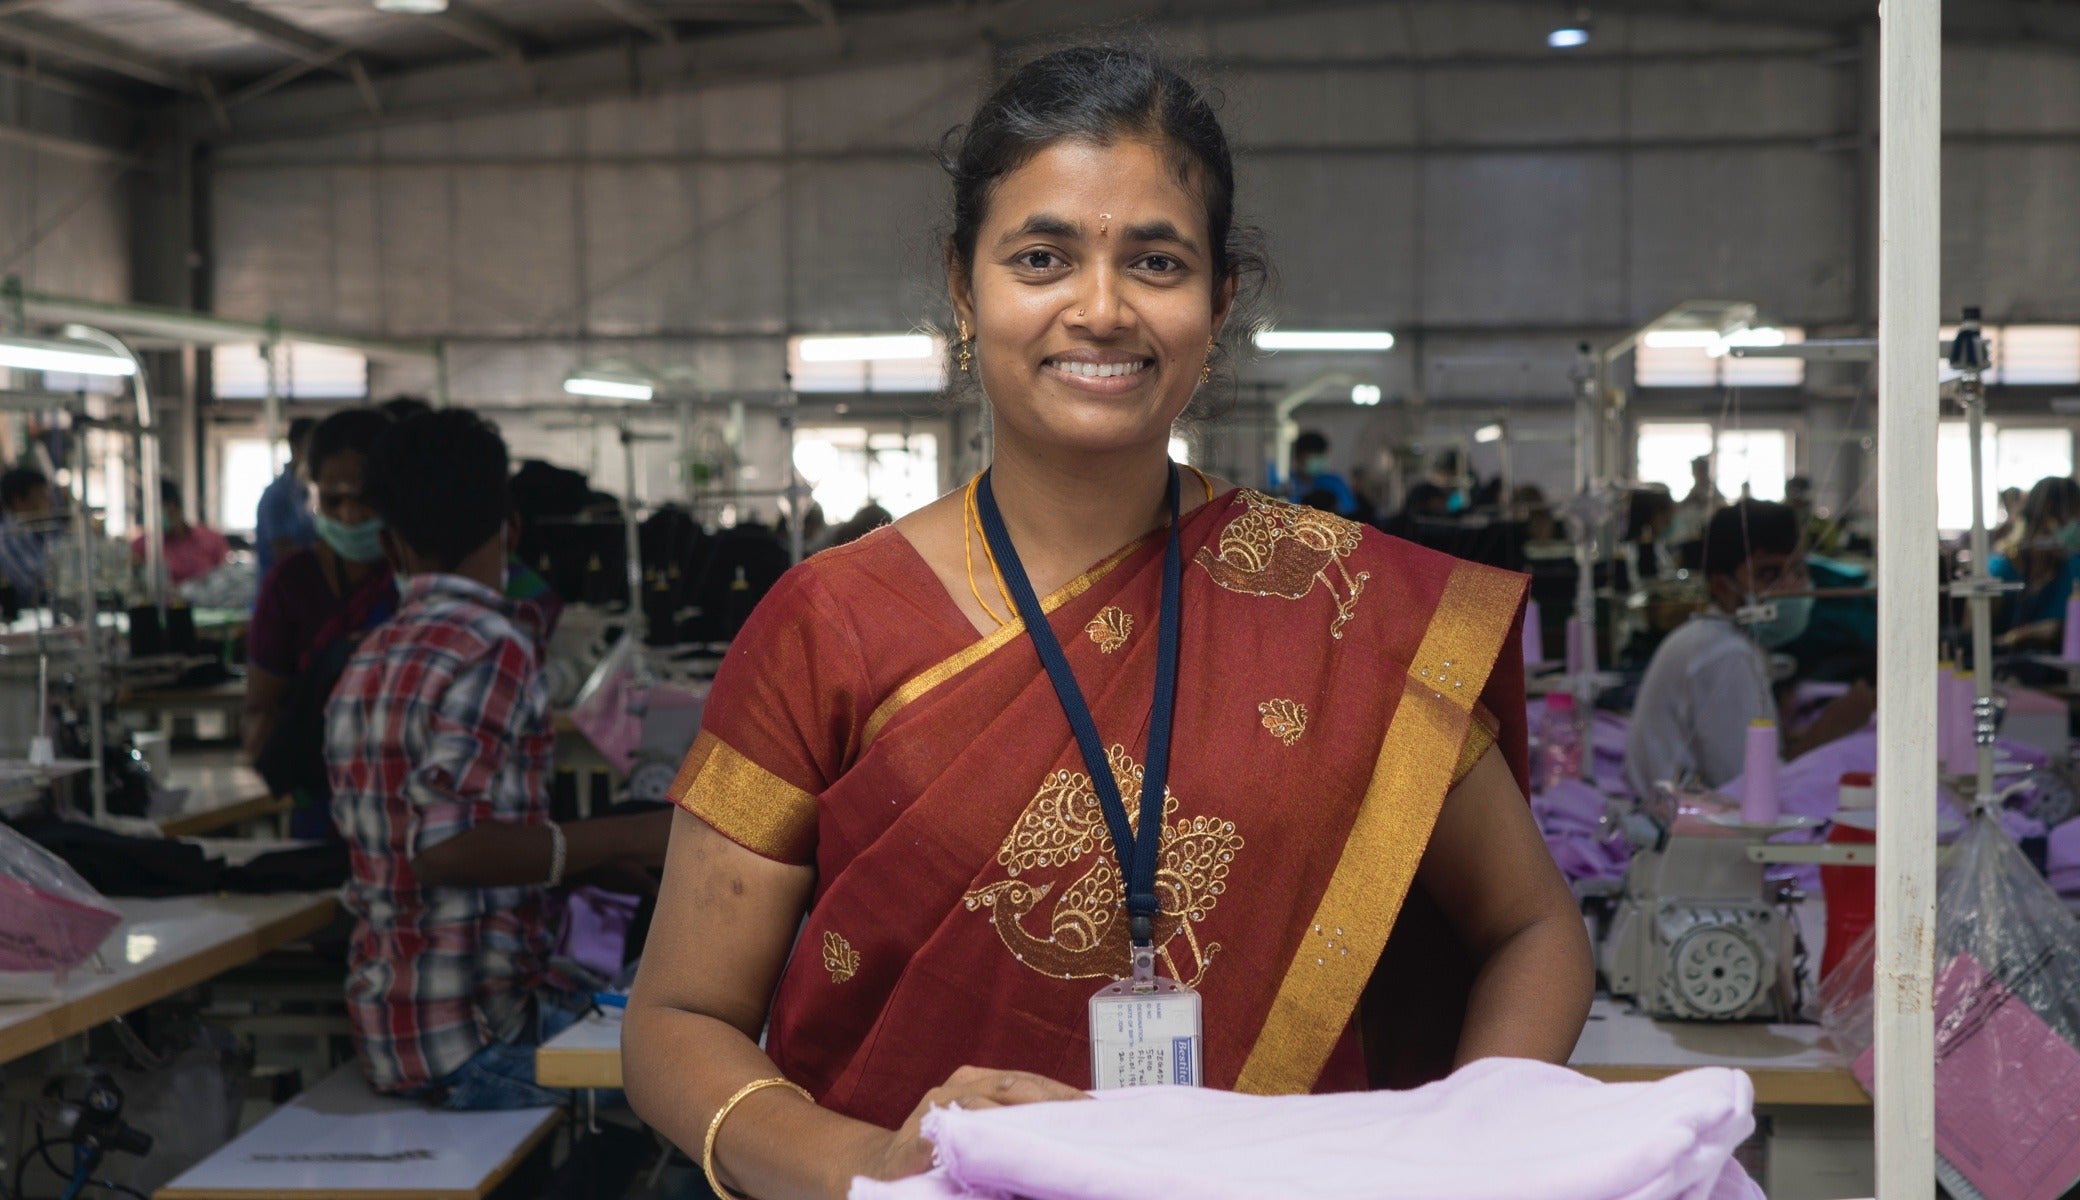 Jegadeeswari V is a tailor at this India-based factory.